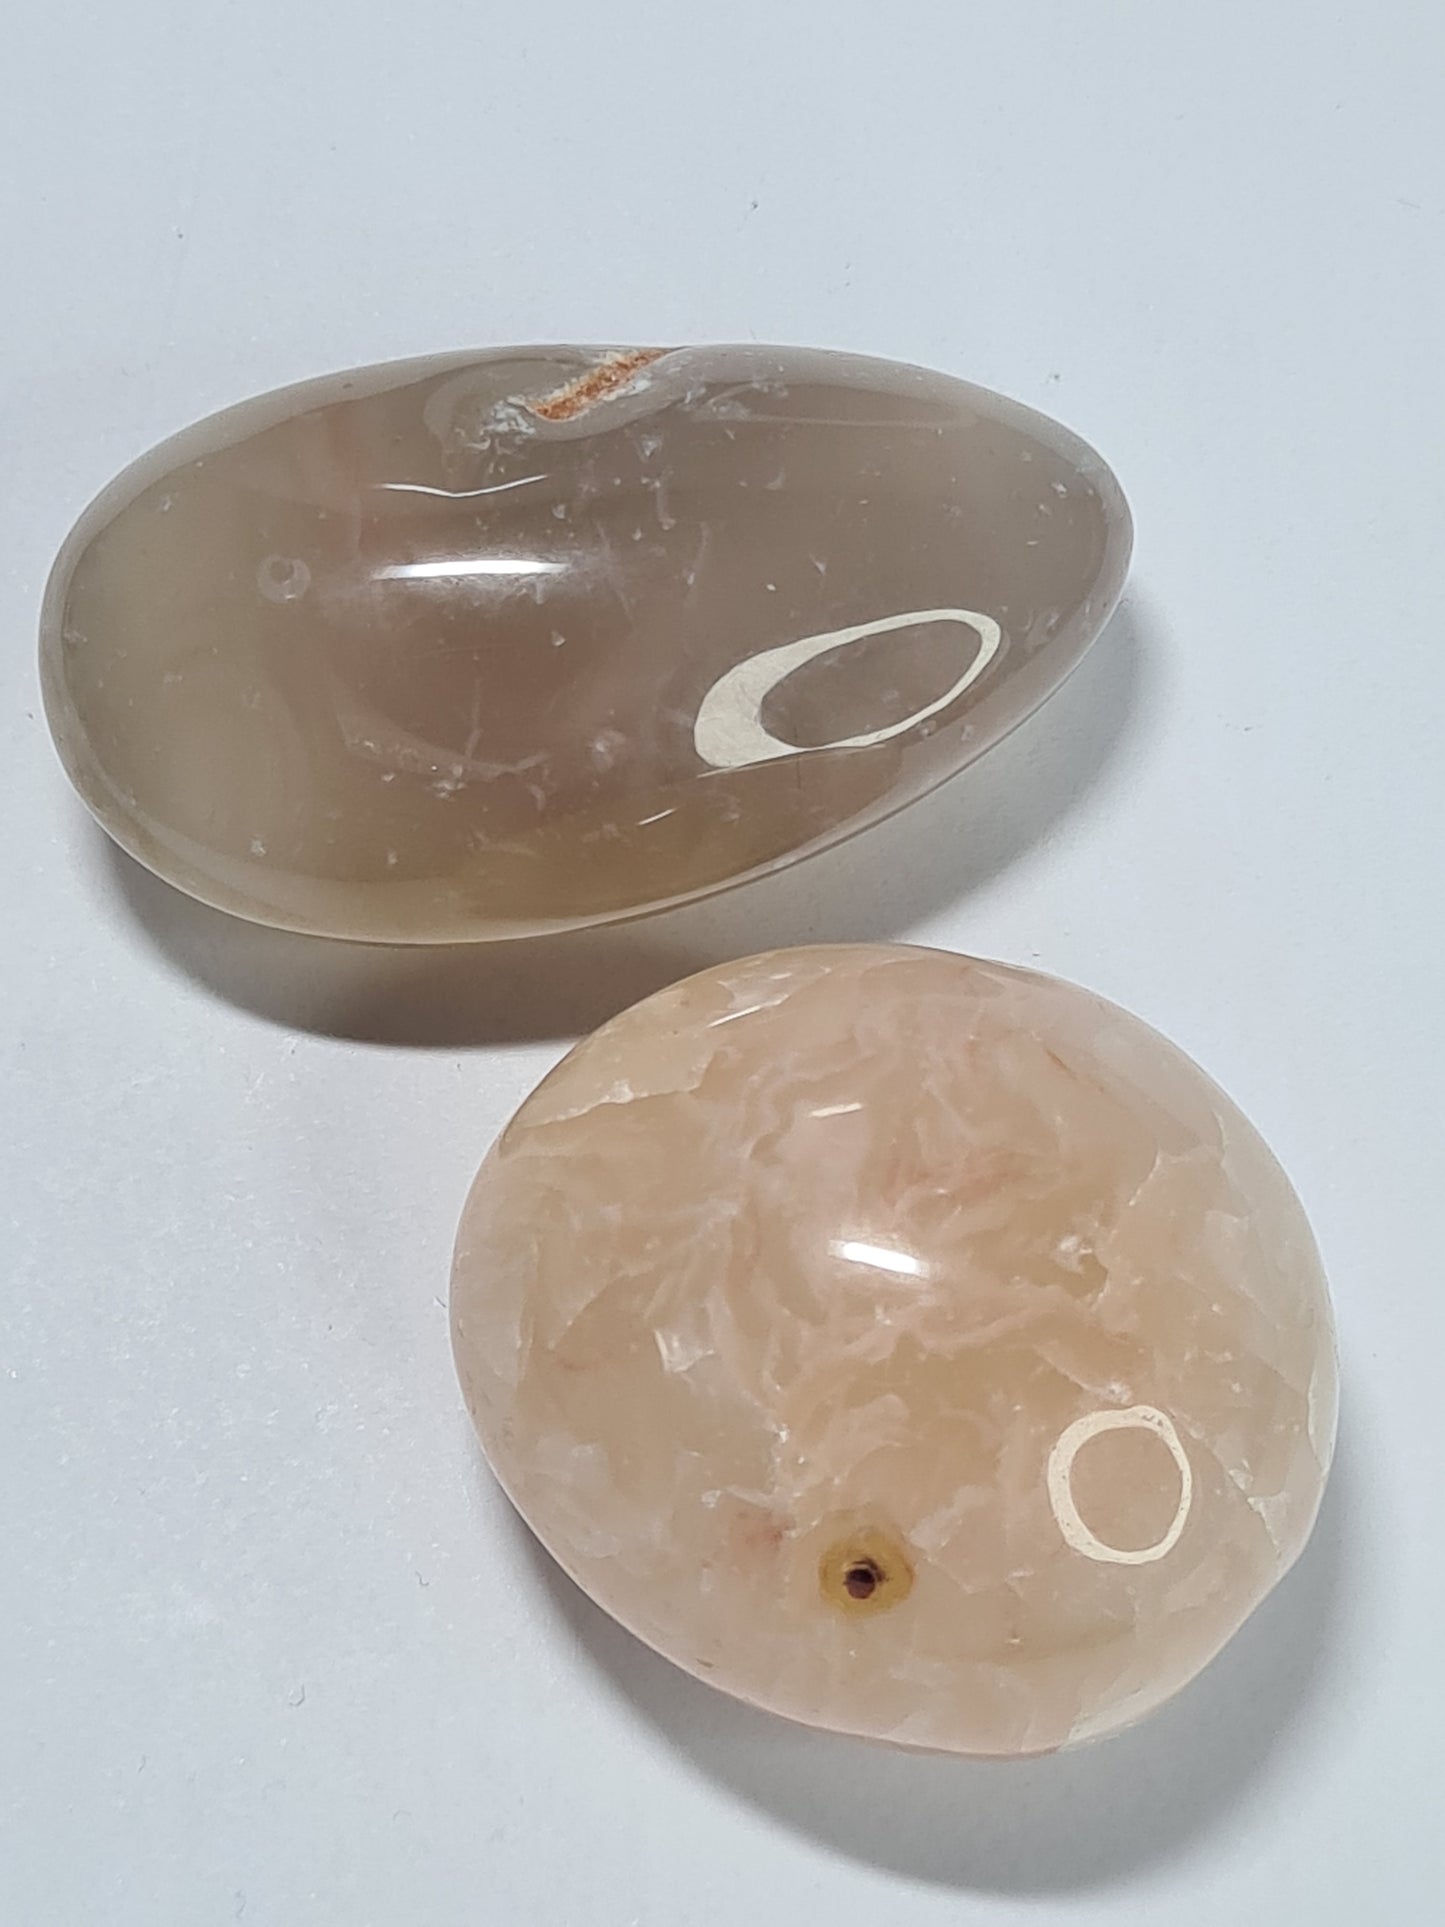 Botswana Agate Large Tumbles, in Peach amd Grey with banding.